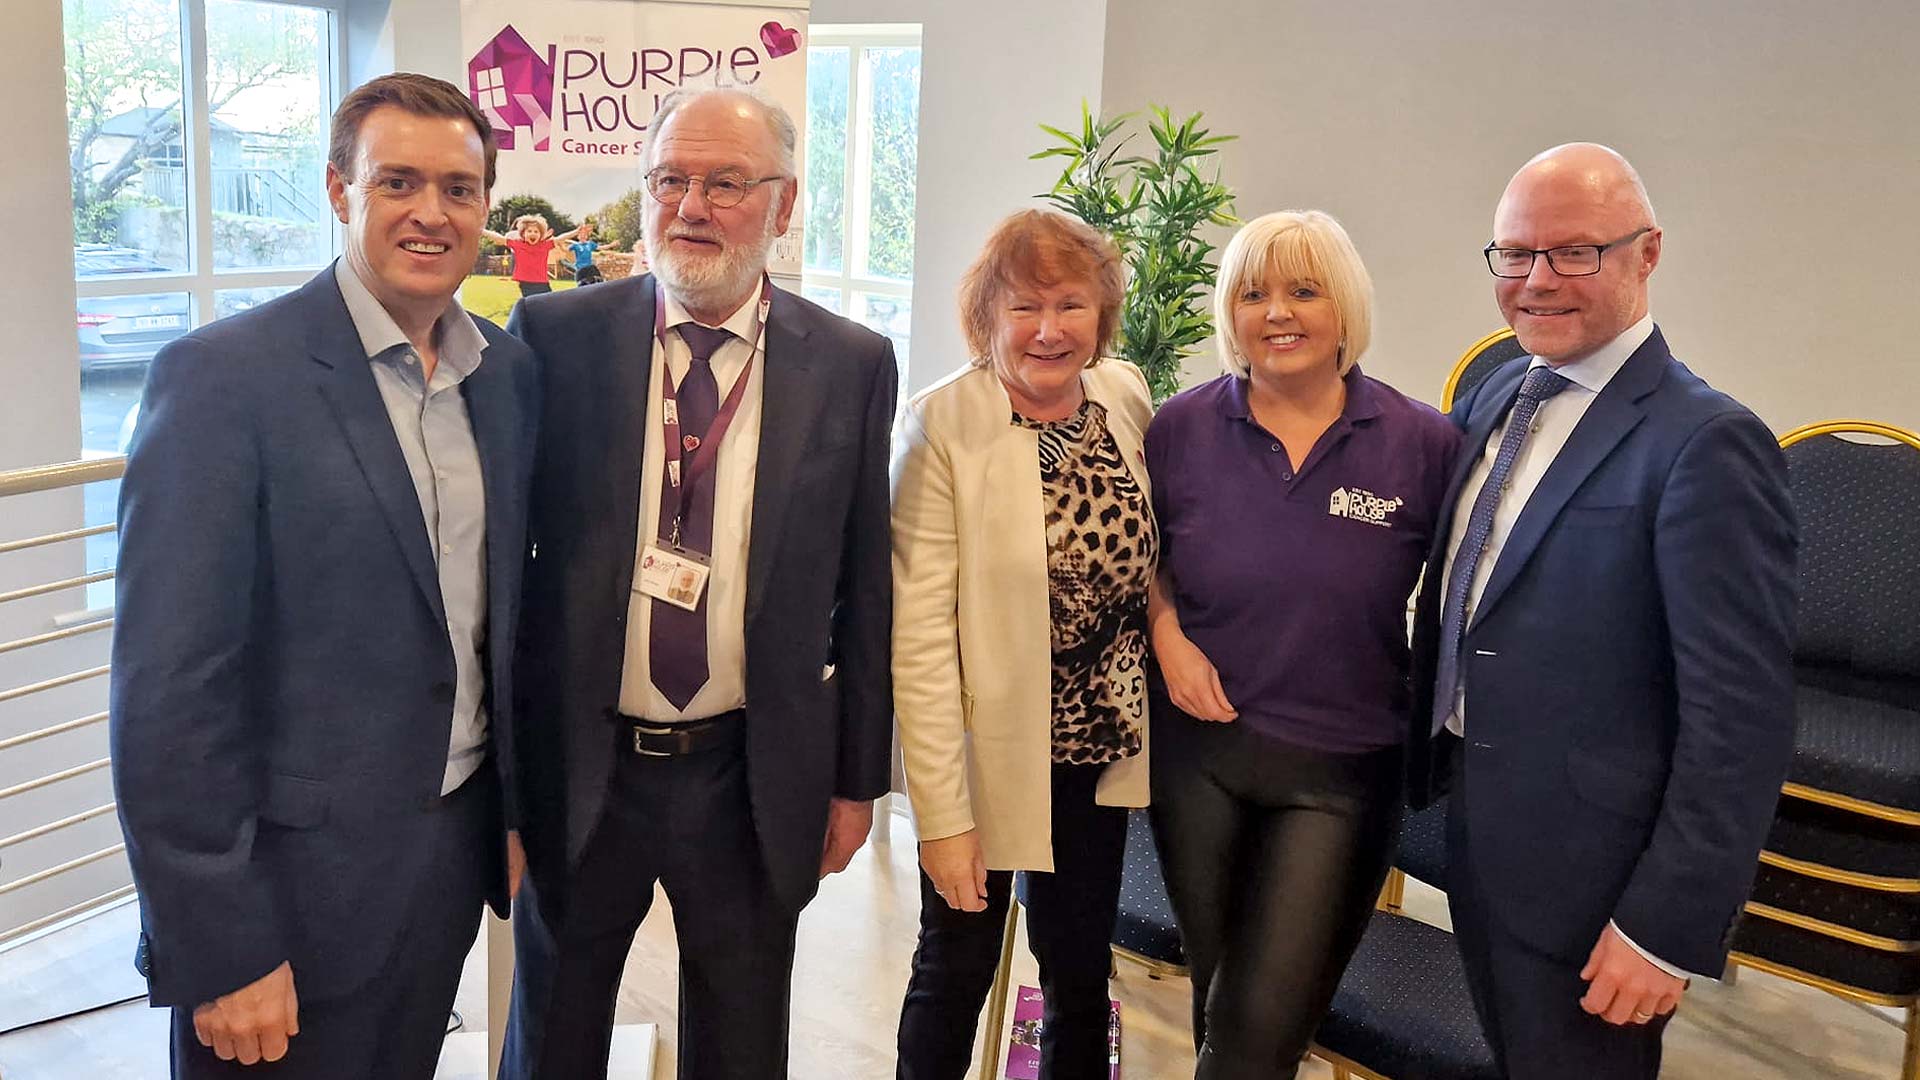 Our CEO Eoin O'Reilly with Minister for Health Stephen Donnelly and the team at Purple House Cancer Support